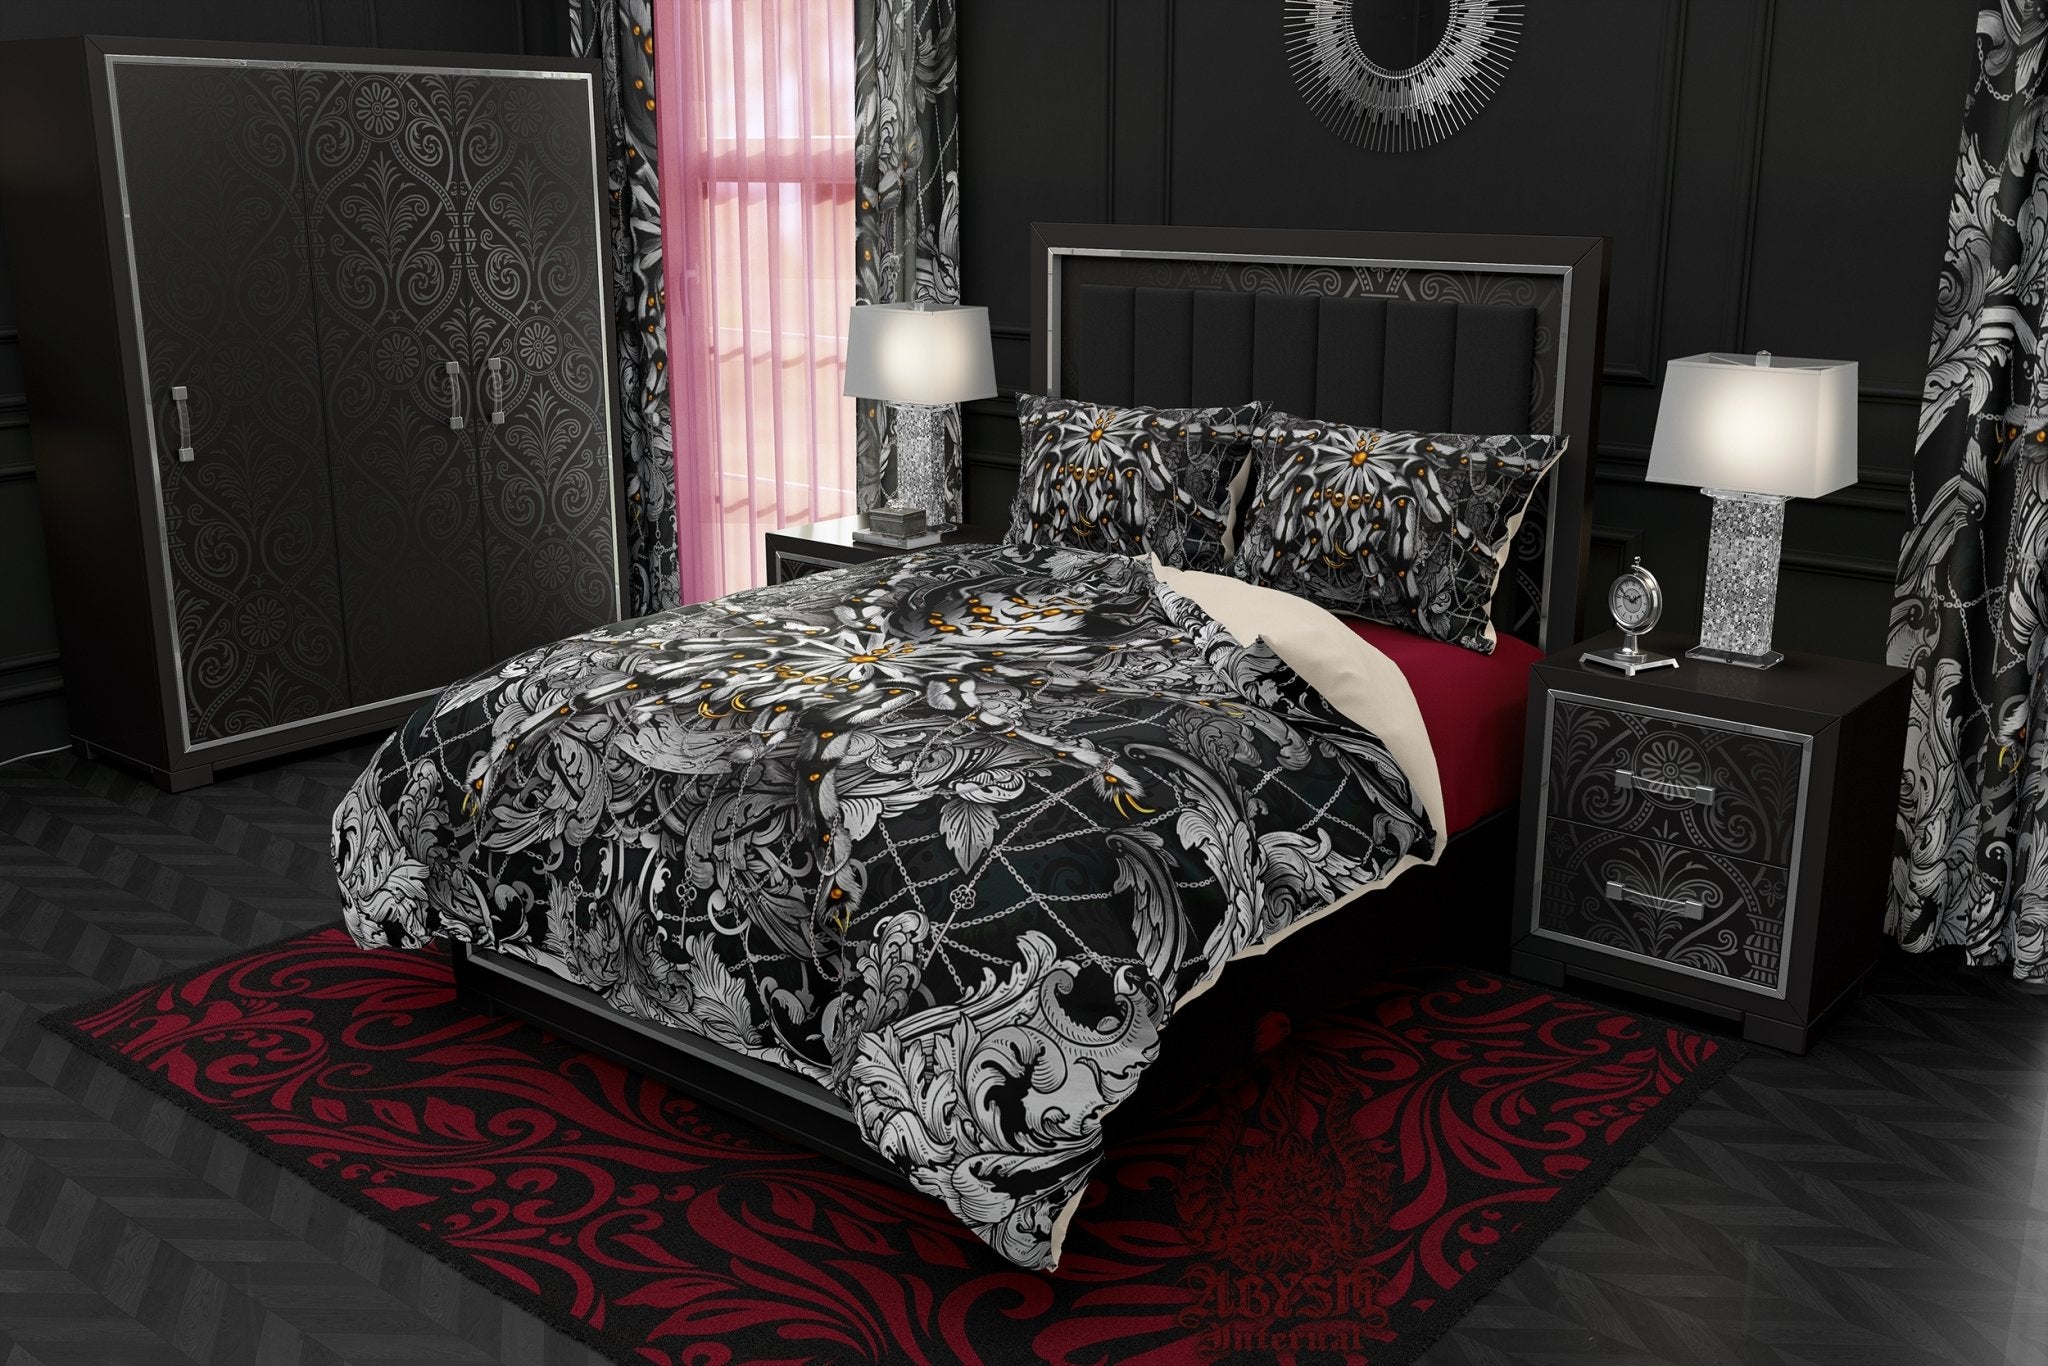 Spider Bedding Set, Comforter and Duvet, Bed Cover and Bedroom Decor, King, Queen and Twin Size - Tarantula Silver Black - Abysm Internal